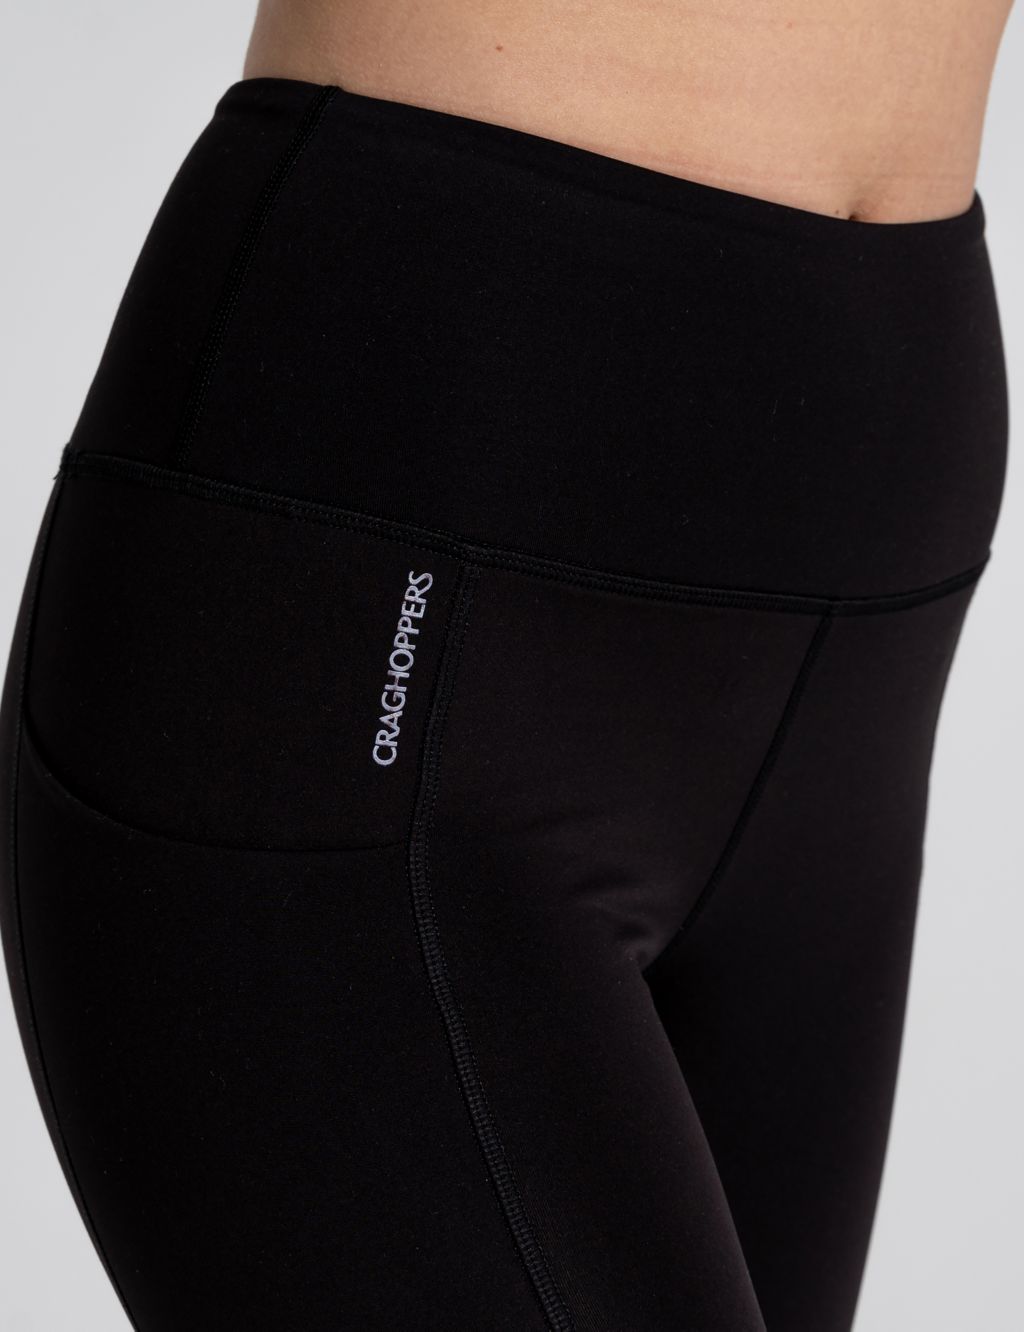 Buy Craghoppers Thermo Black Tights from Next Canada